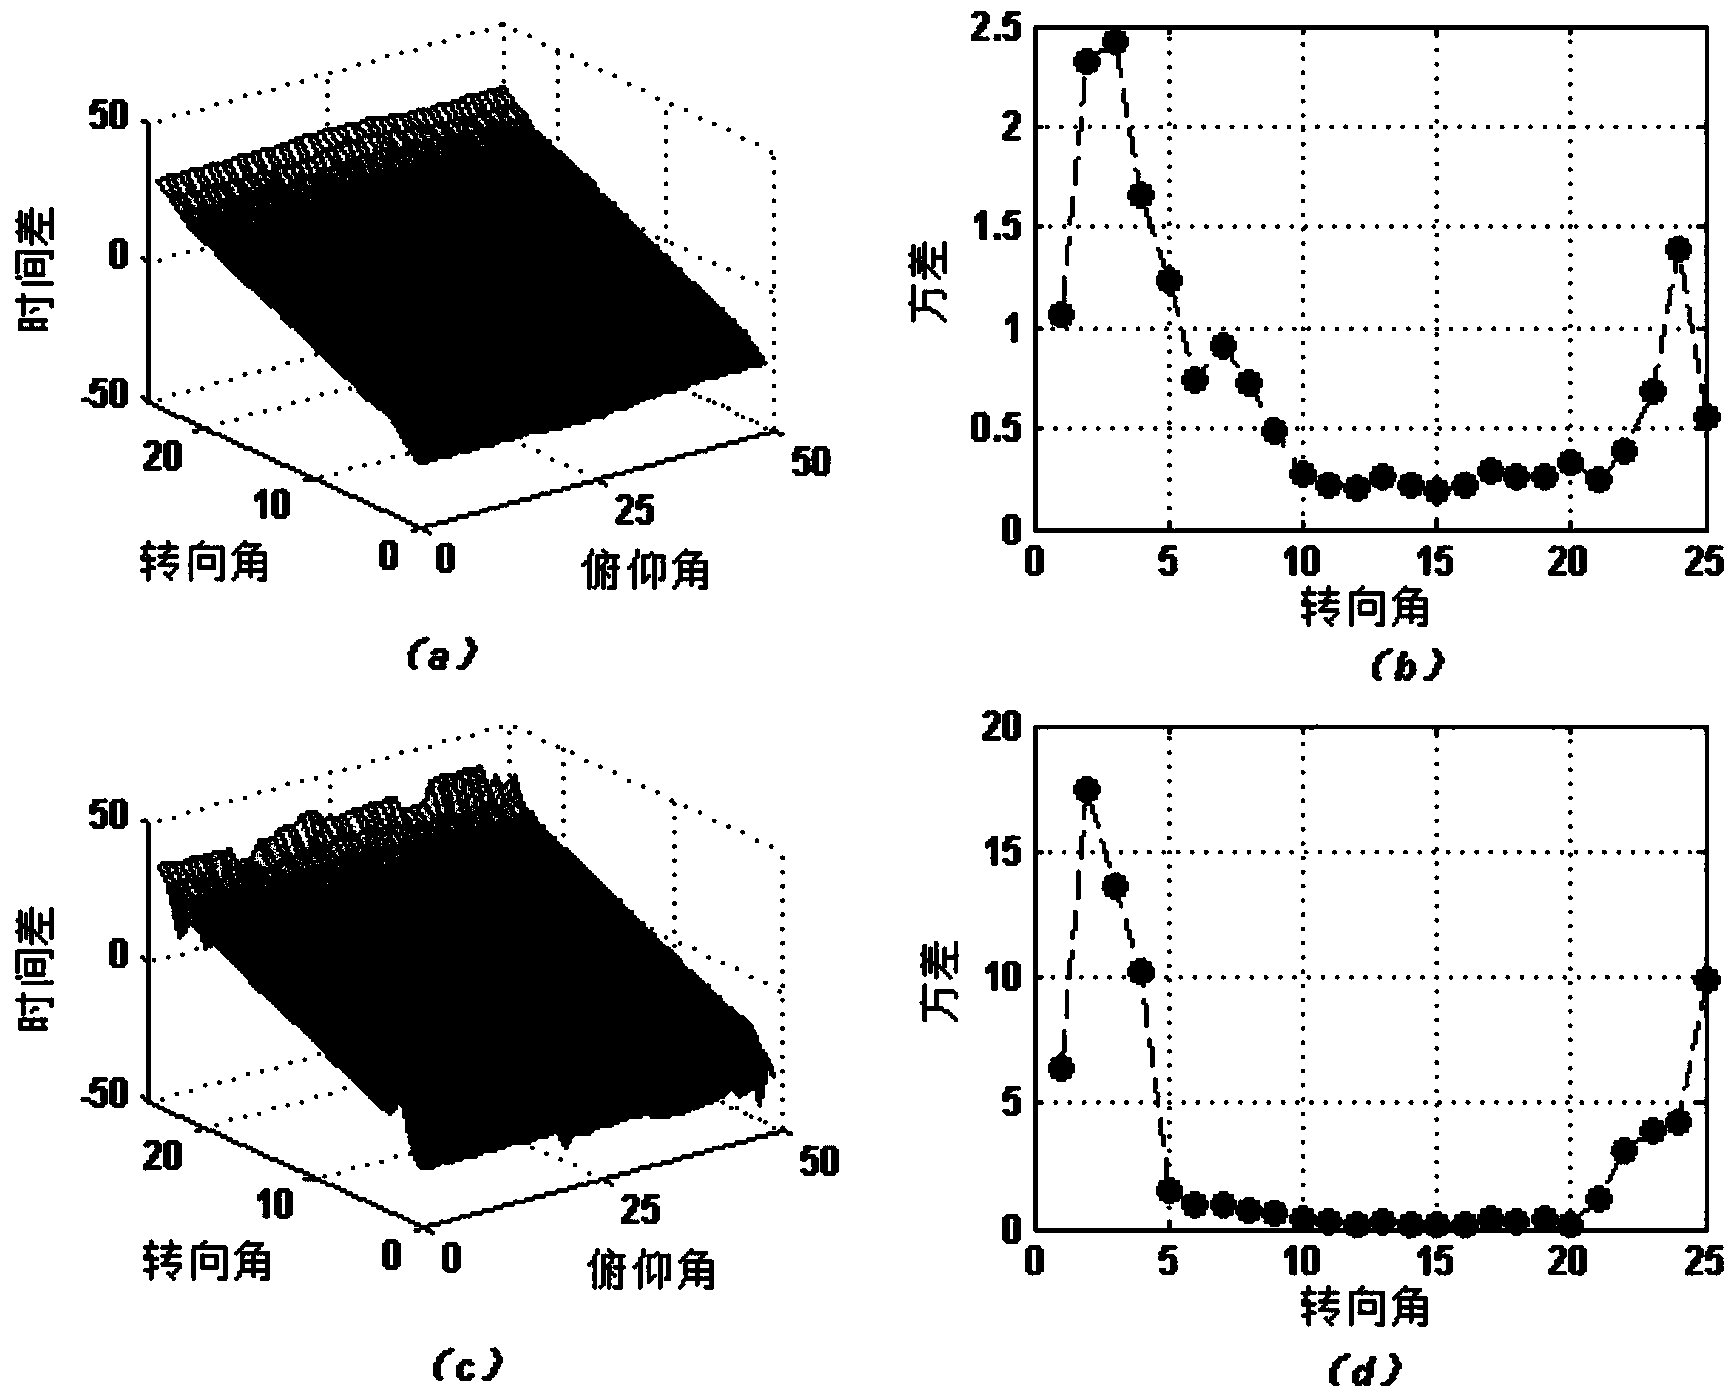 Binaural sound source positioning method based on delay compensation and binaural coincidence